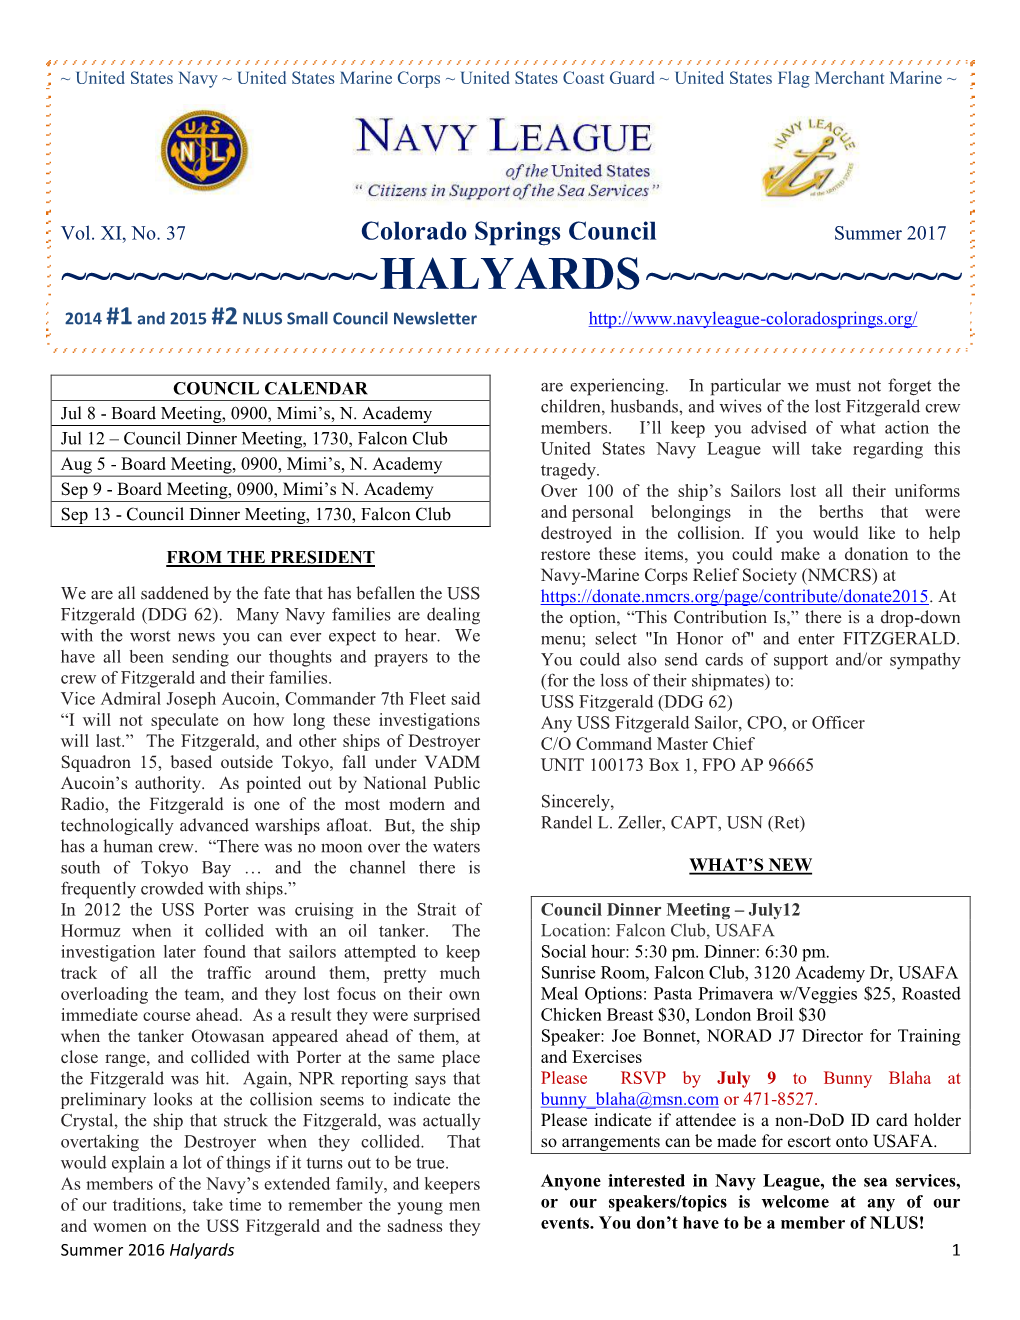 HALYARDS ~~~~~~~~~~~~~ 2014 #1 and 2015 #2 NLUS Small Council Newsletter